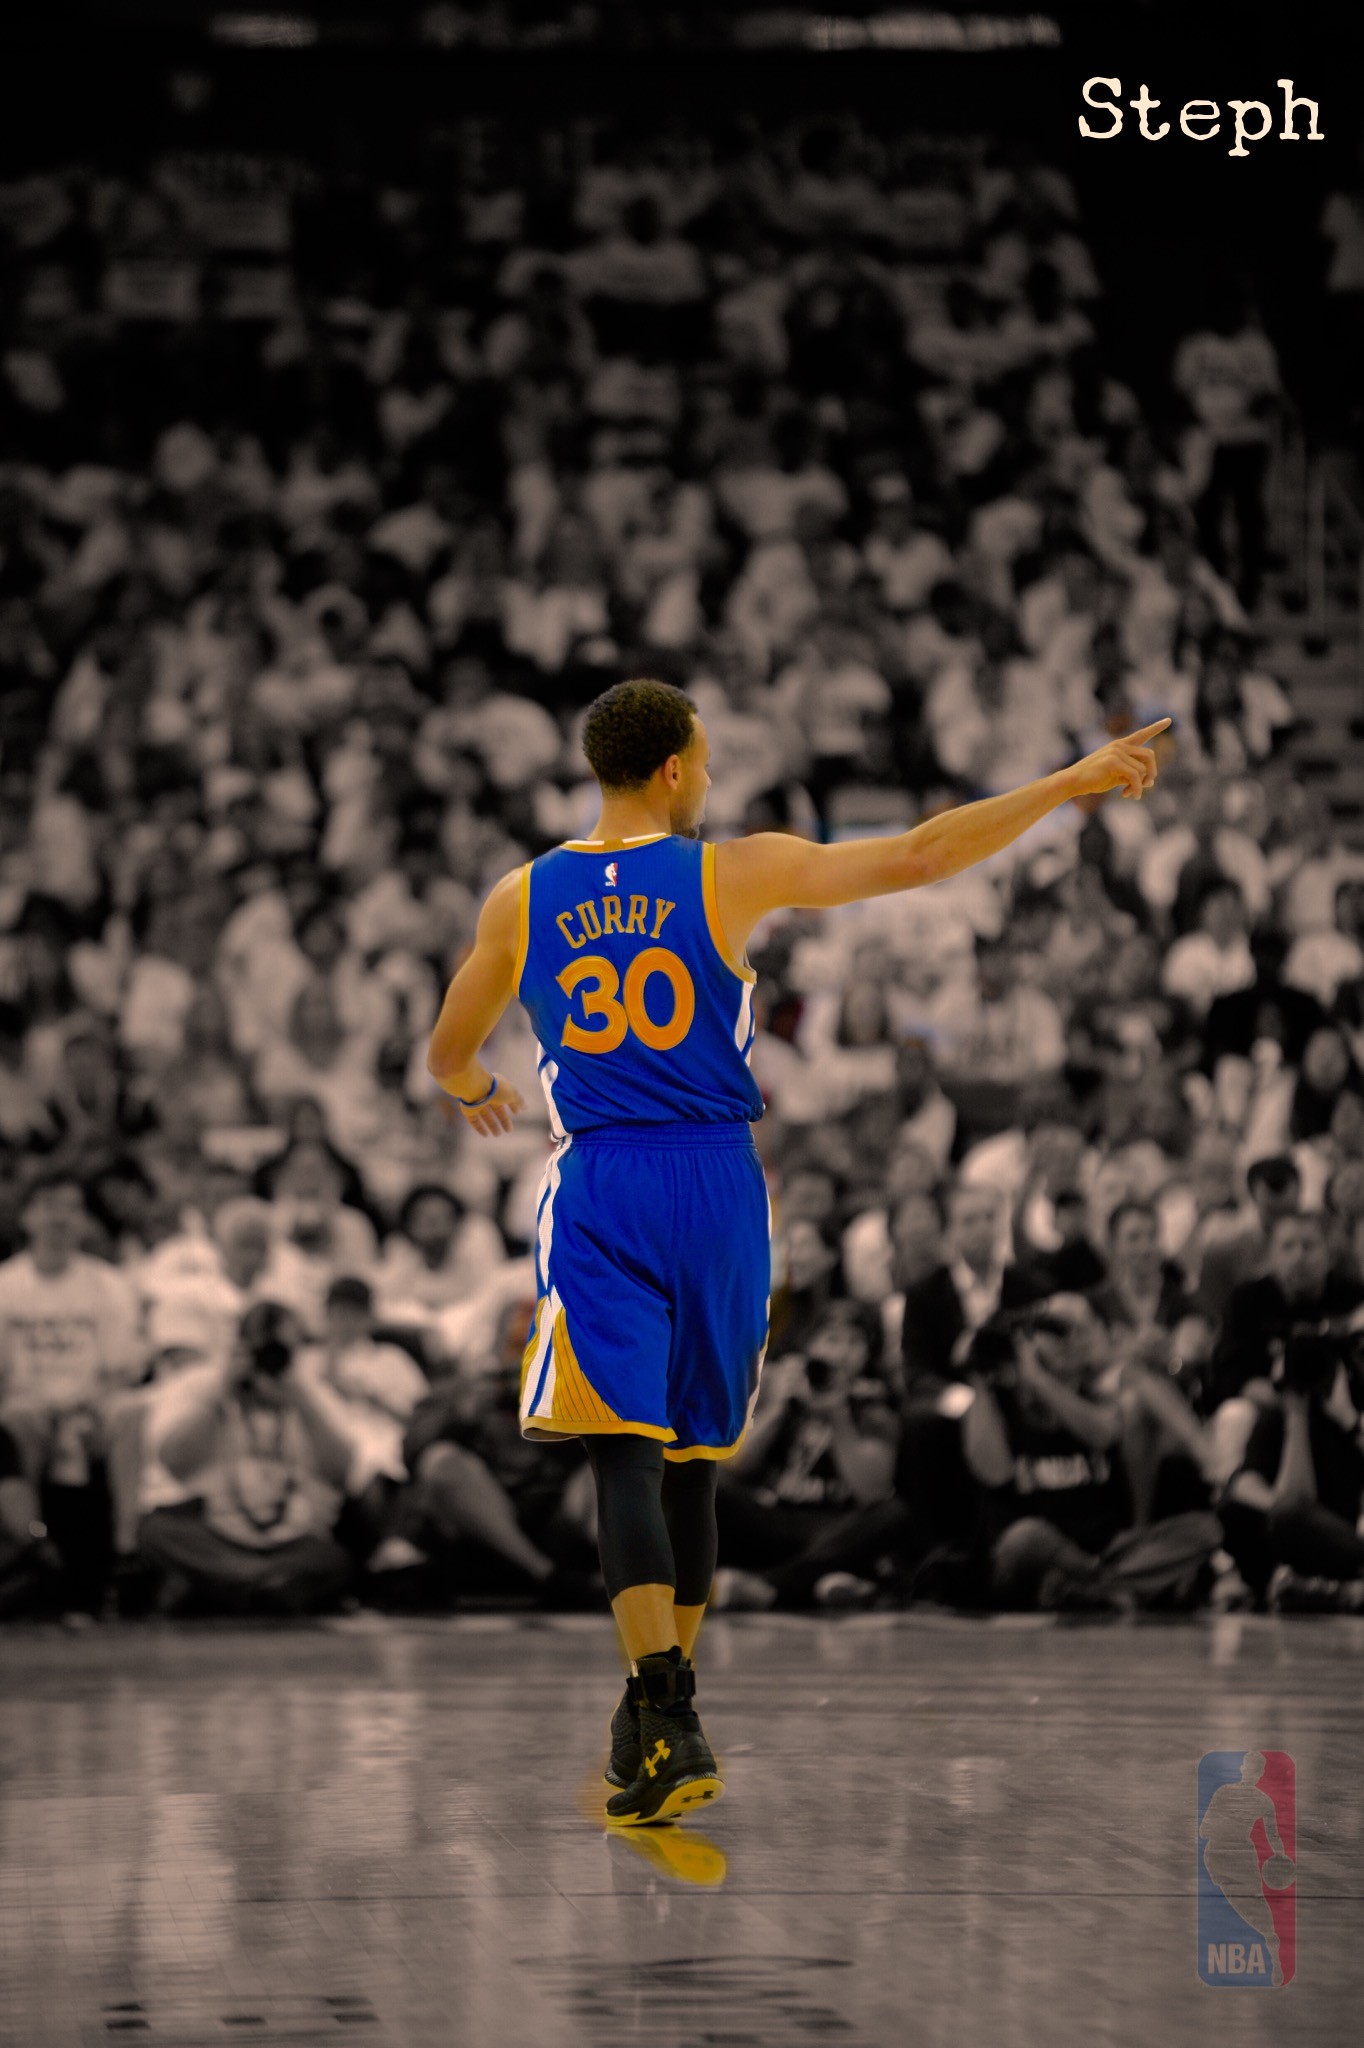 The 25 best Stephen curry wallpaper ideas on Pinterest Stephen curry games, Stephen curry nationality and Stephen curry